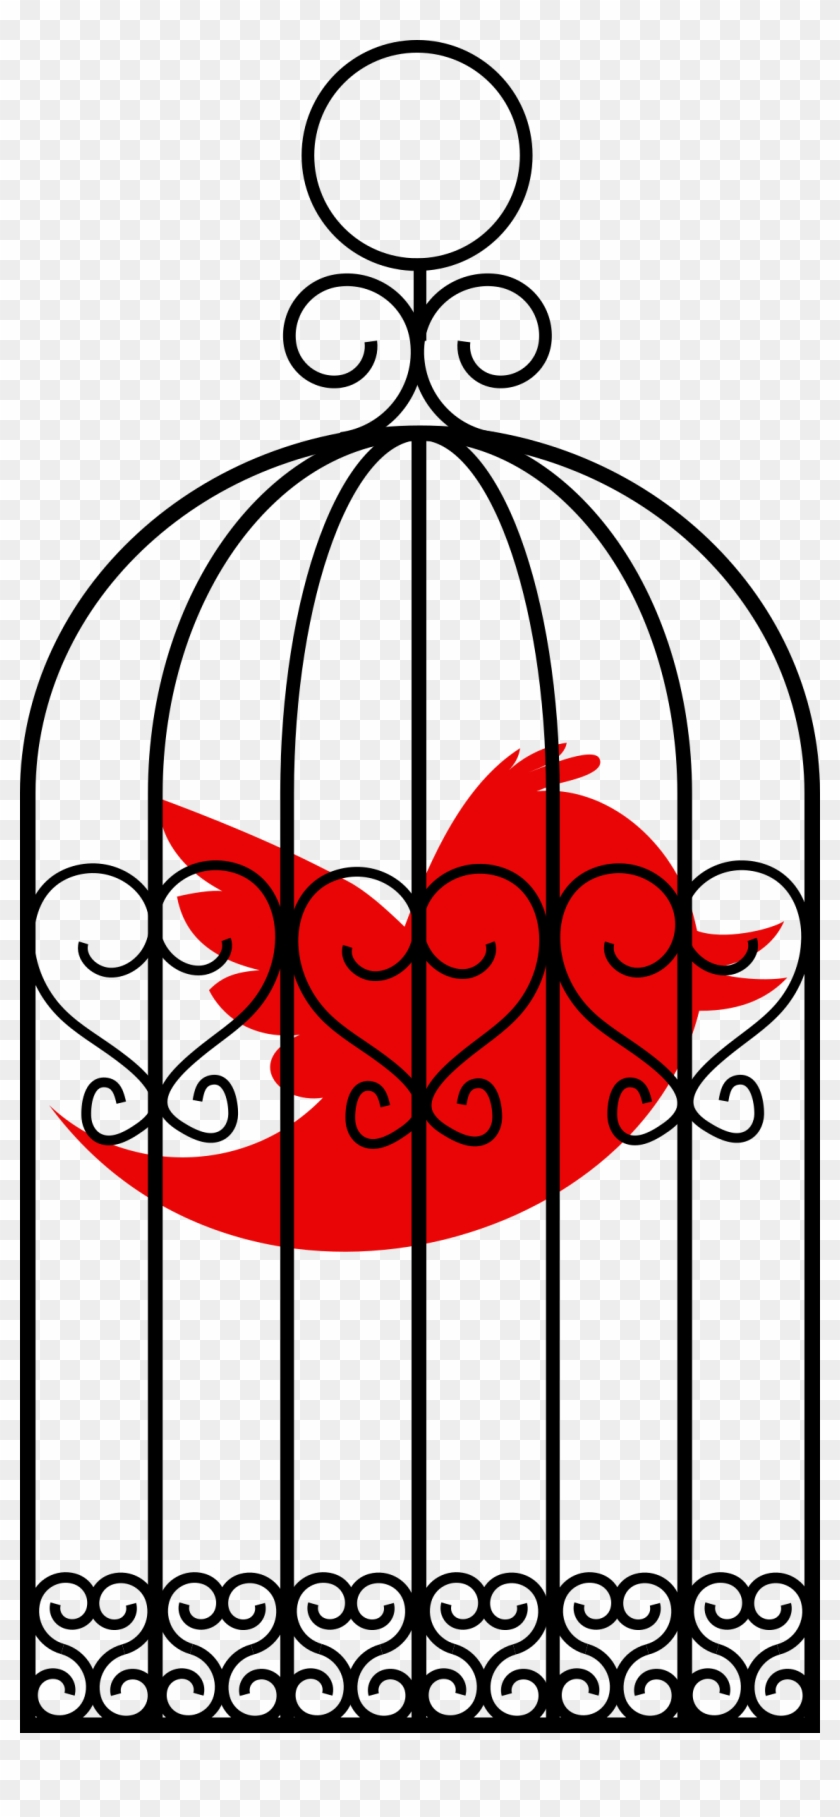 This Free Icons Png Design Of The Peril Of Twitter Clipart #606823